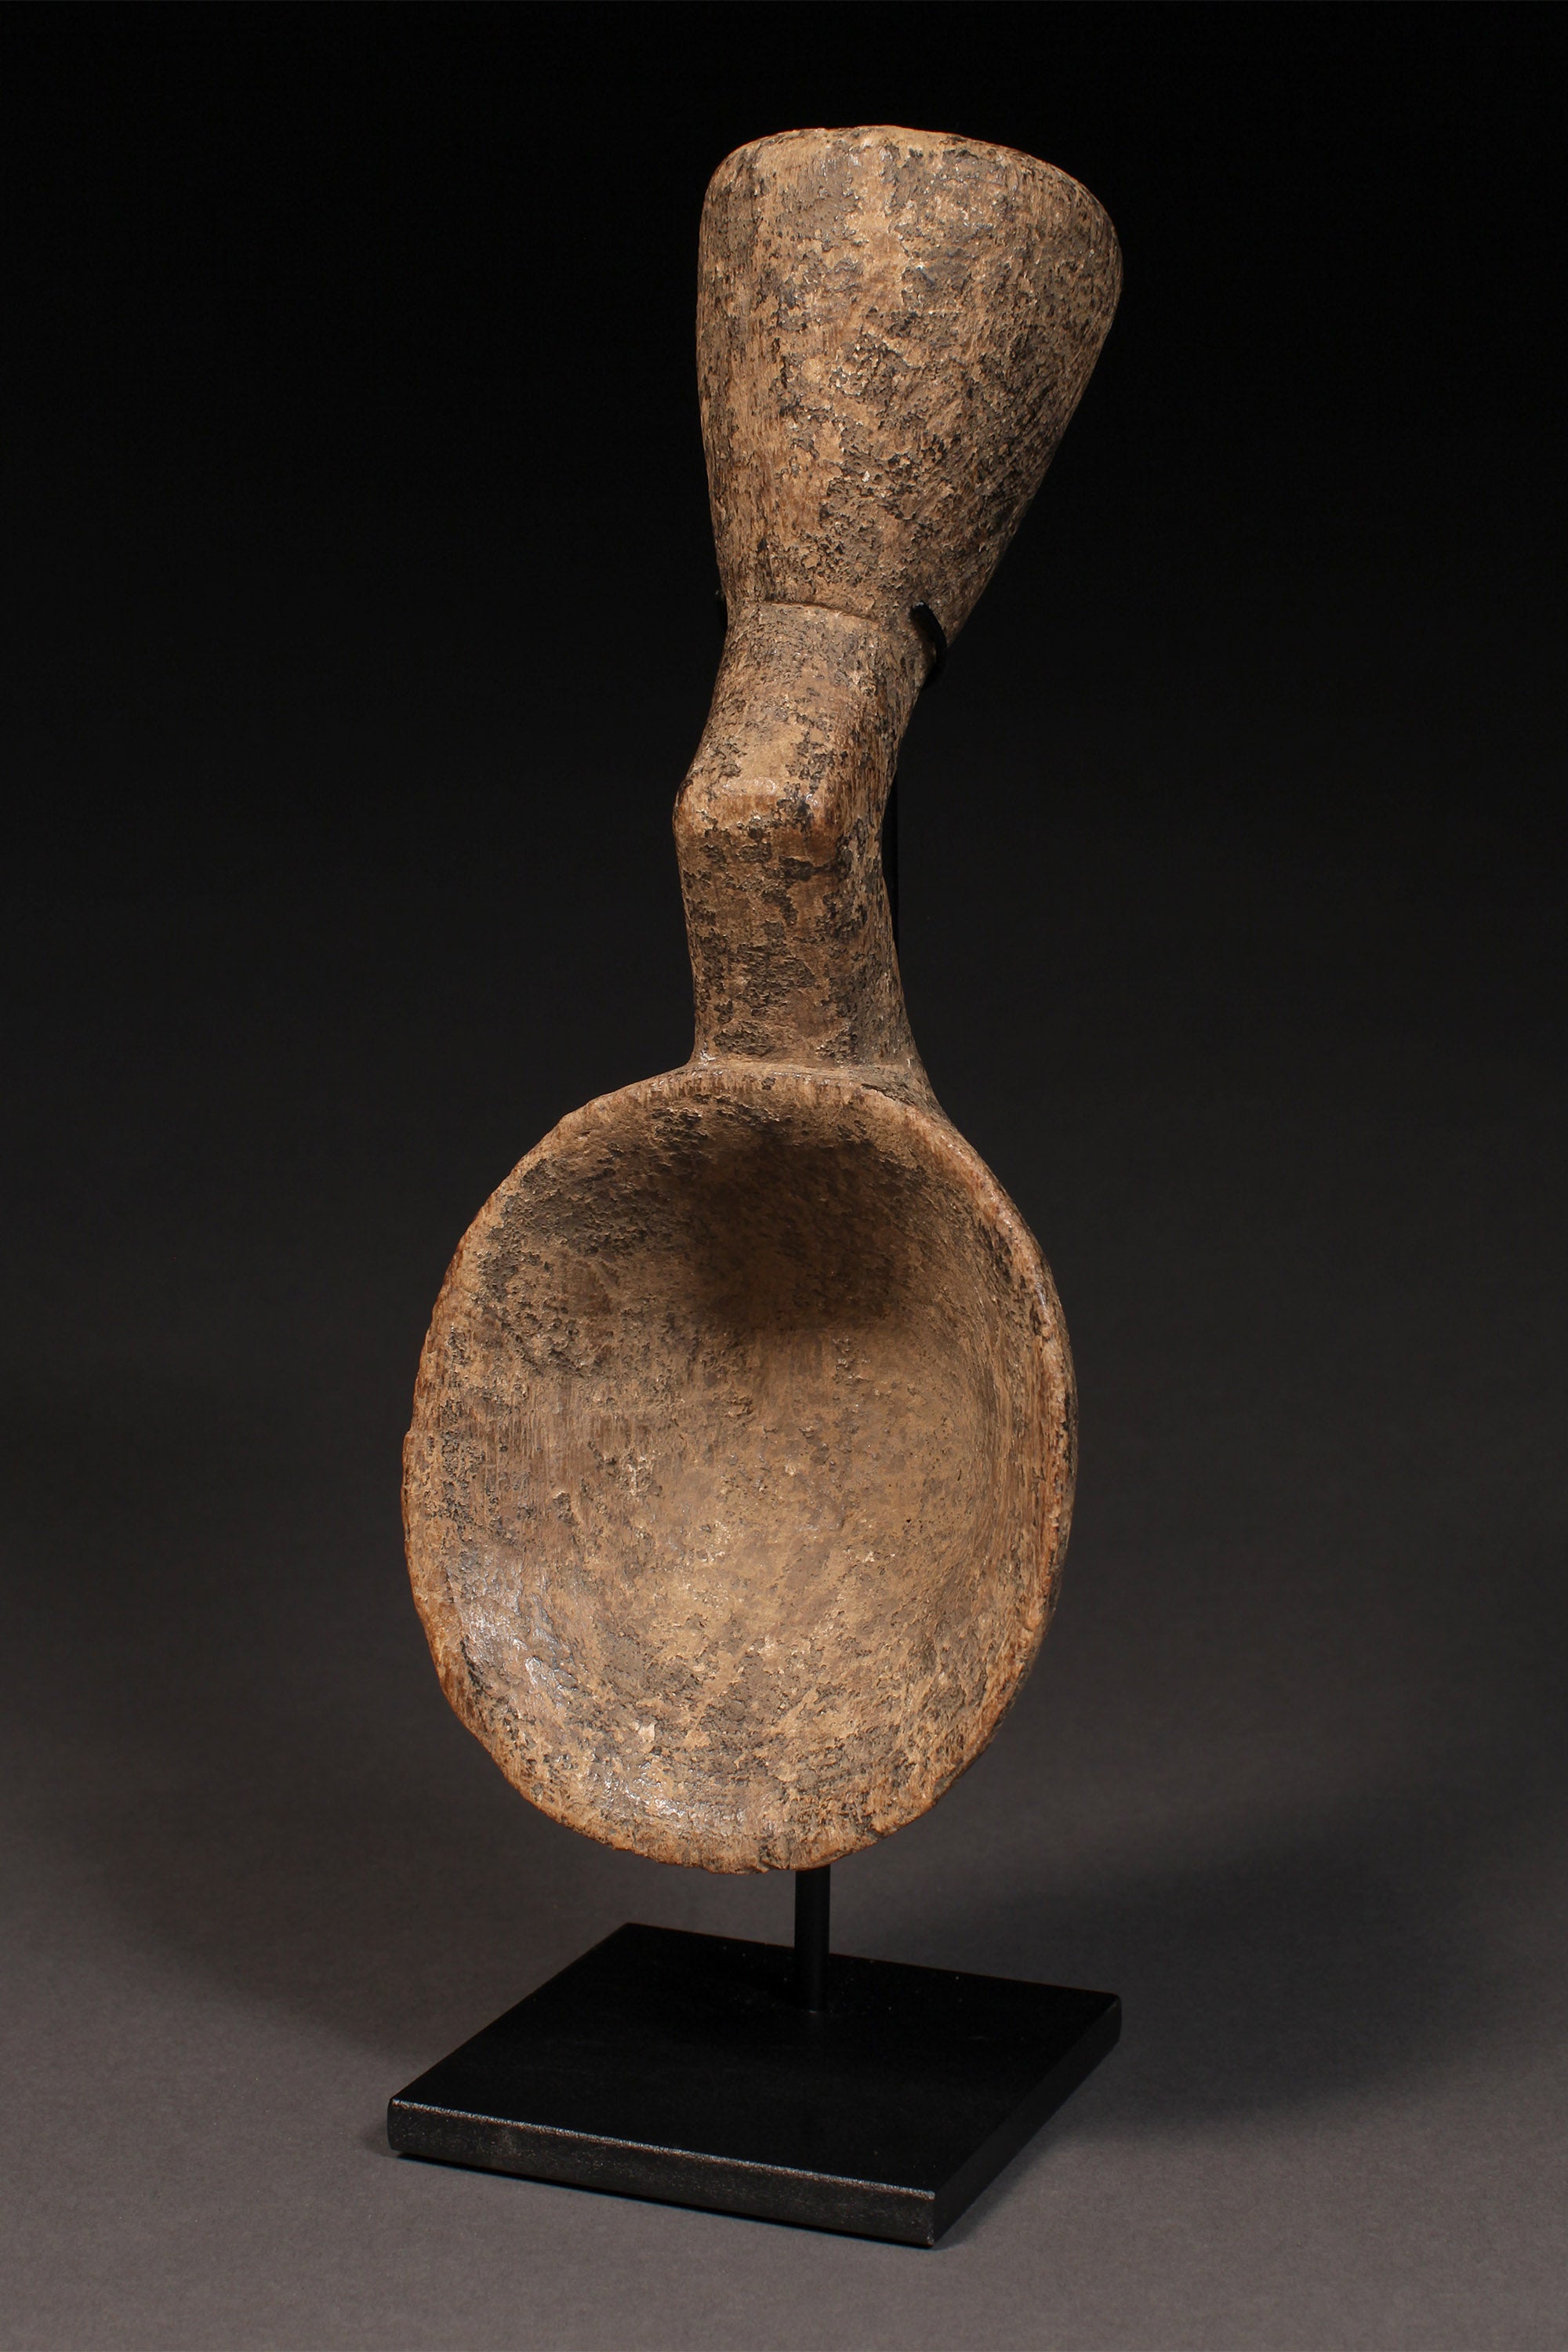 Tribal Objects - African Plural Art - African Art - Objects - Artwork - Decor - Geometric Ceremonial Ladle Spoon, Carved Wood, Kulango Tribe, African Sculpture Object